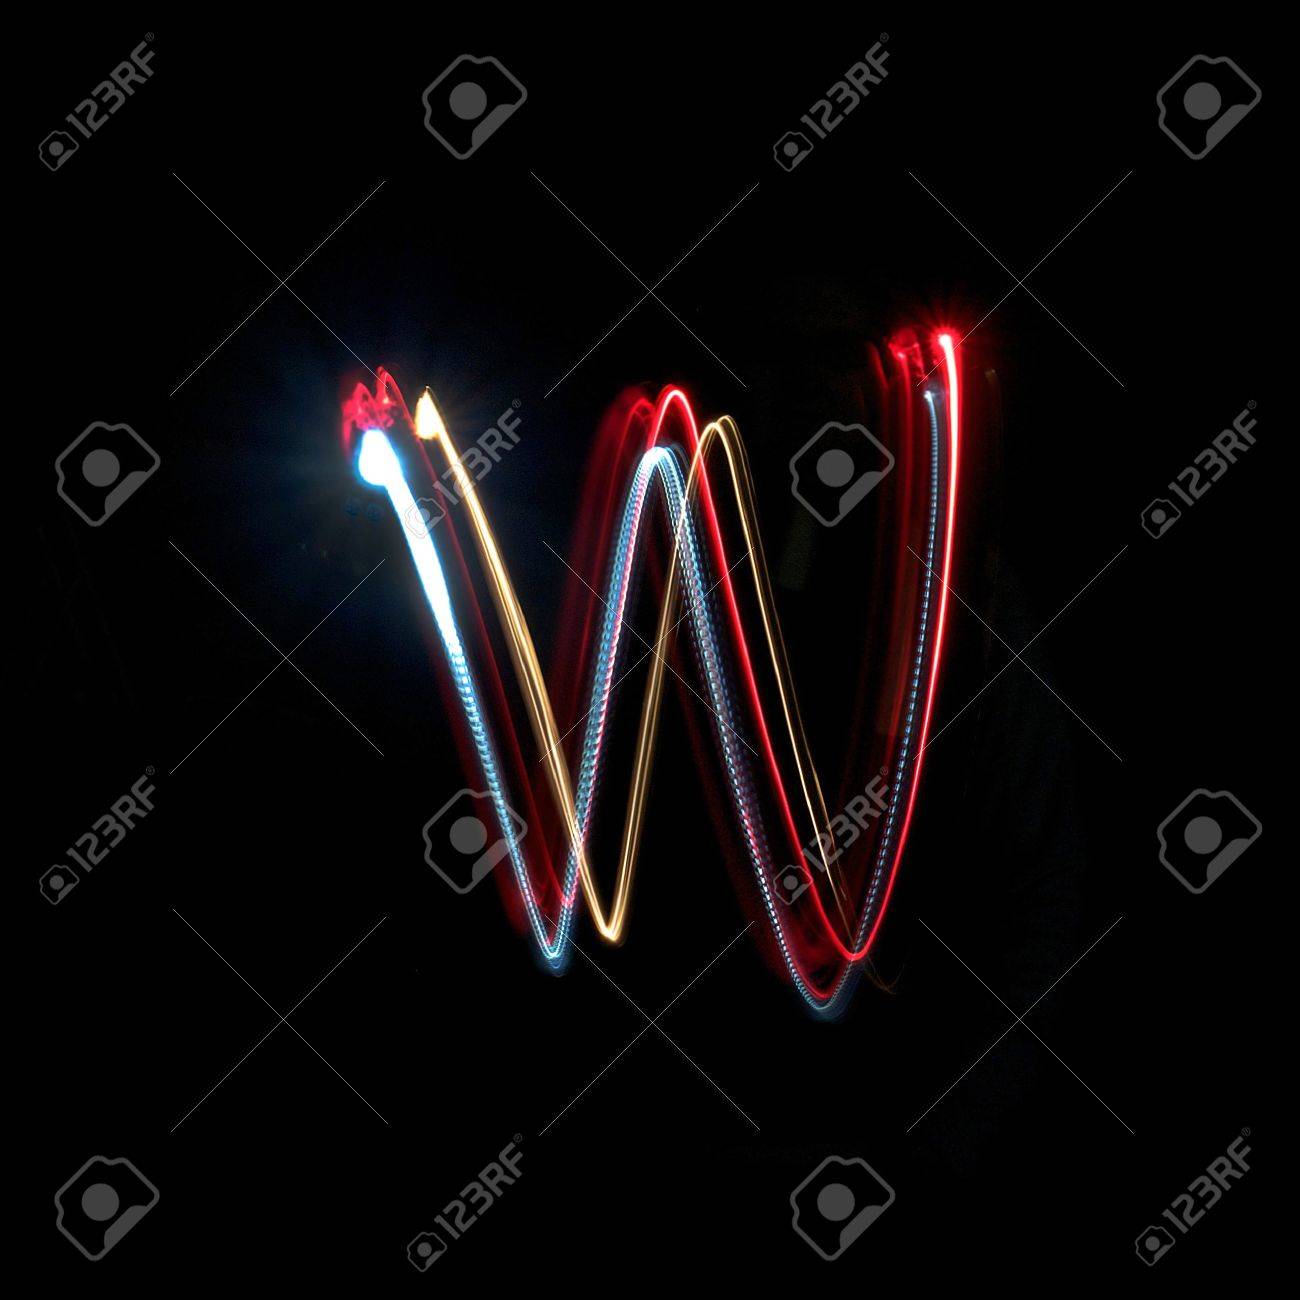 Letter W On A Black Background Made With Light Painting Torches